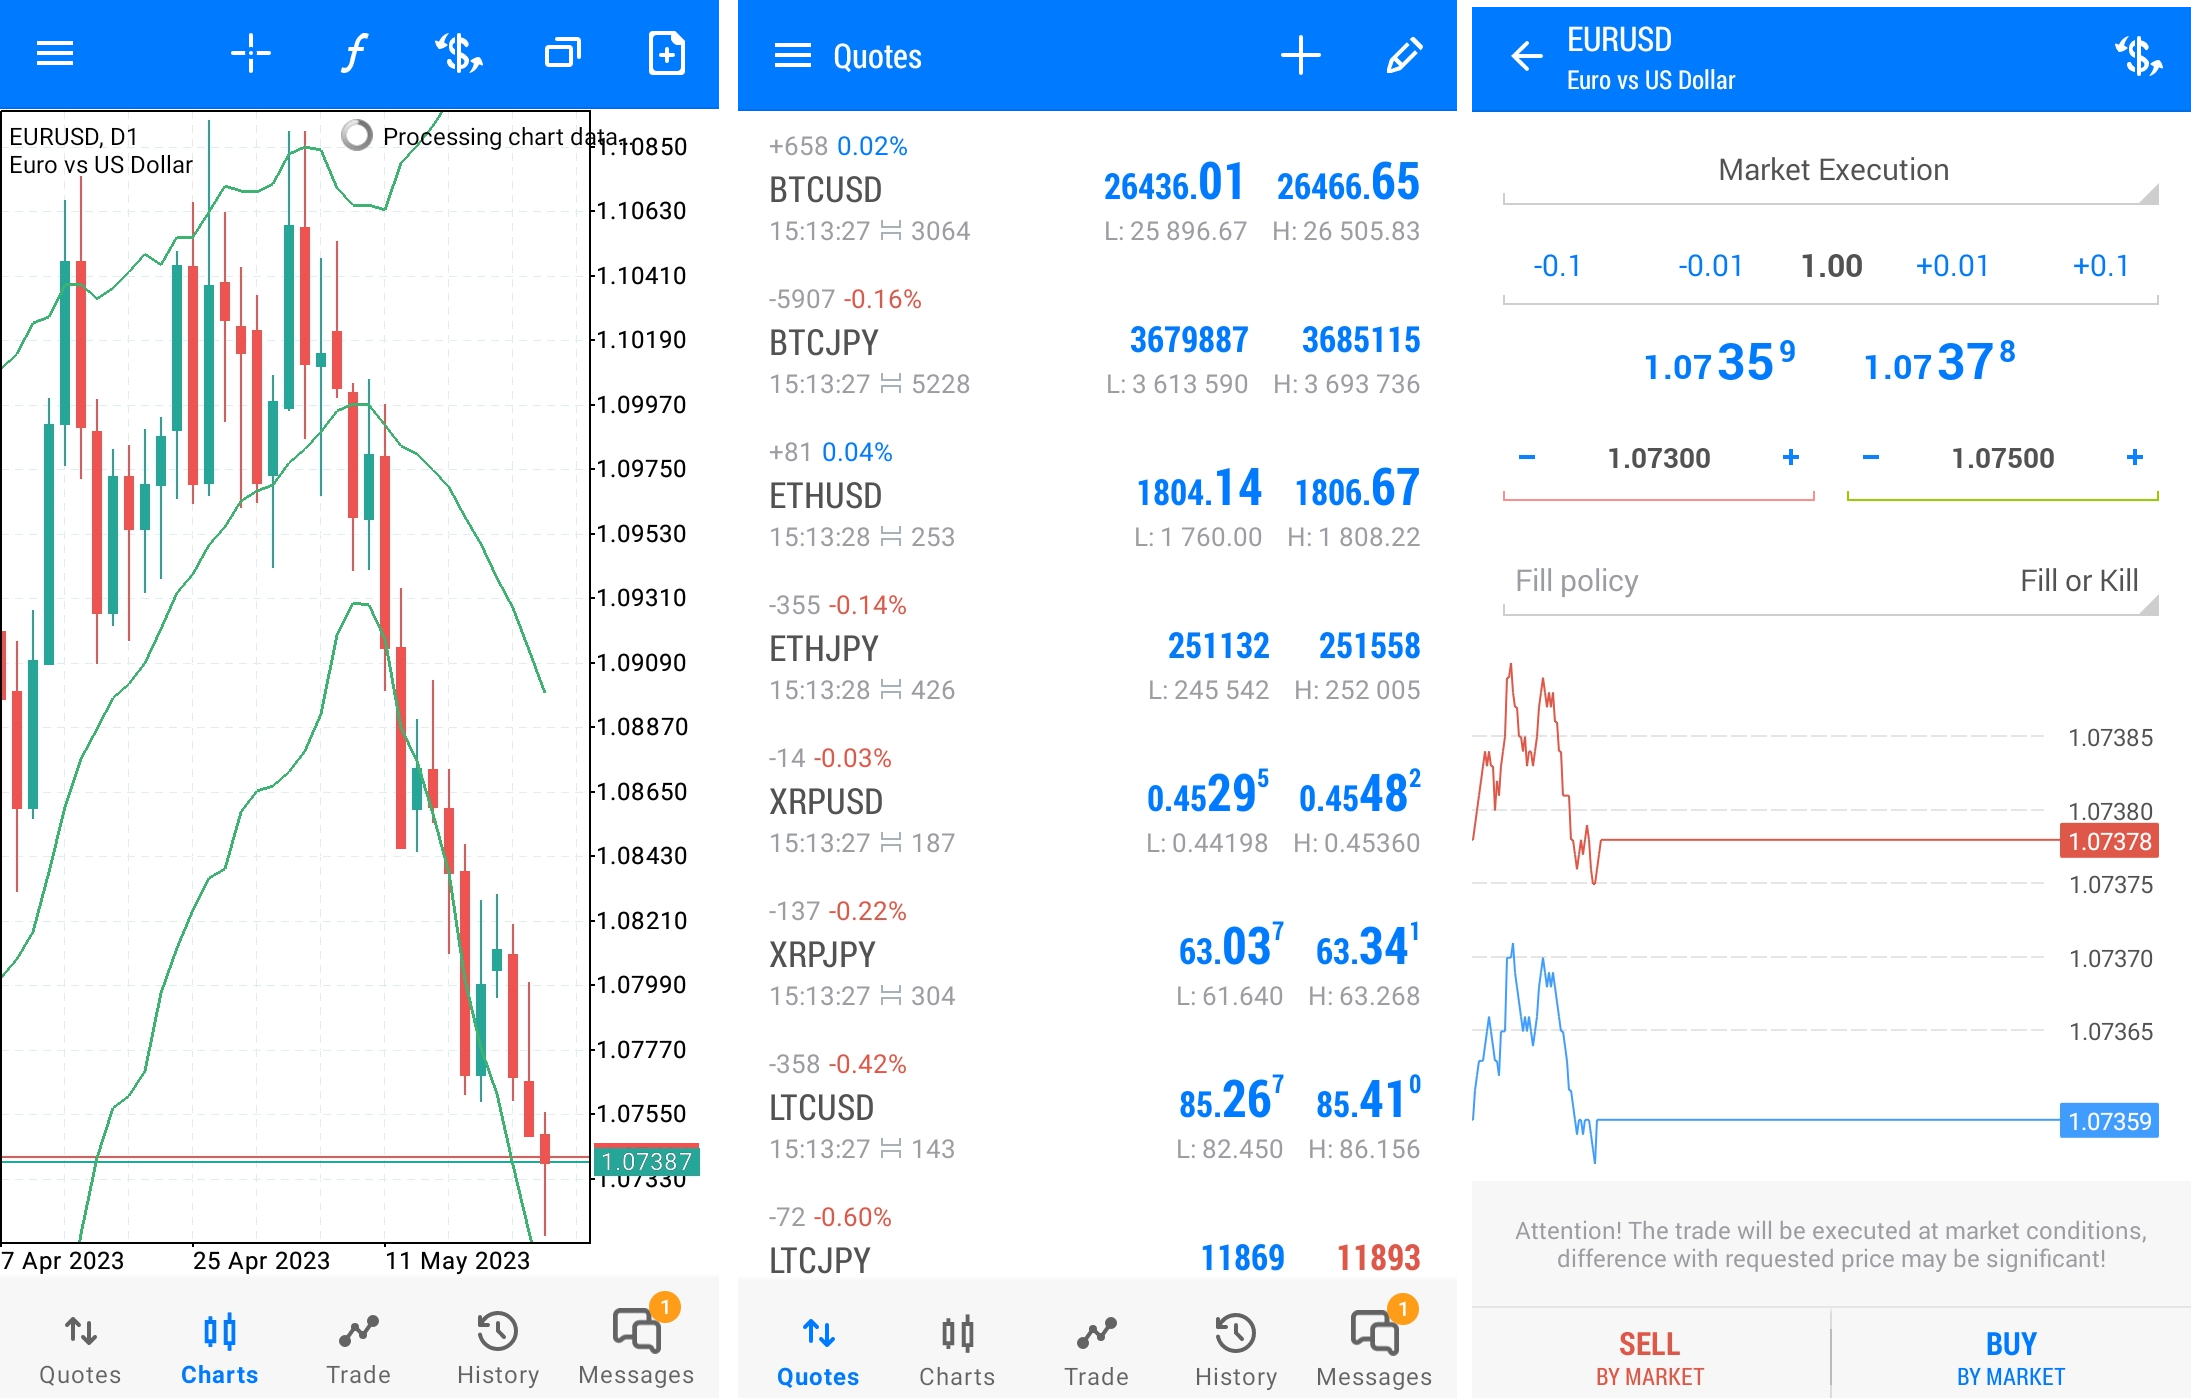 Chart window (on the left), watch list (in the middle), and order placing window (on the right)